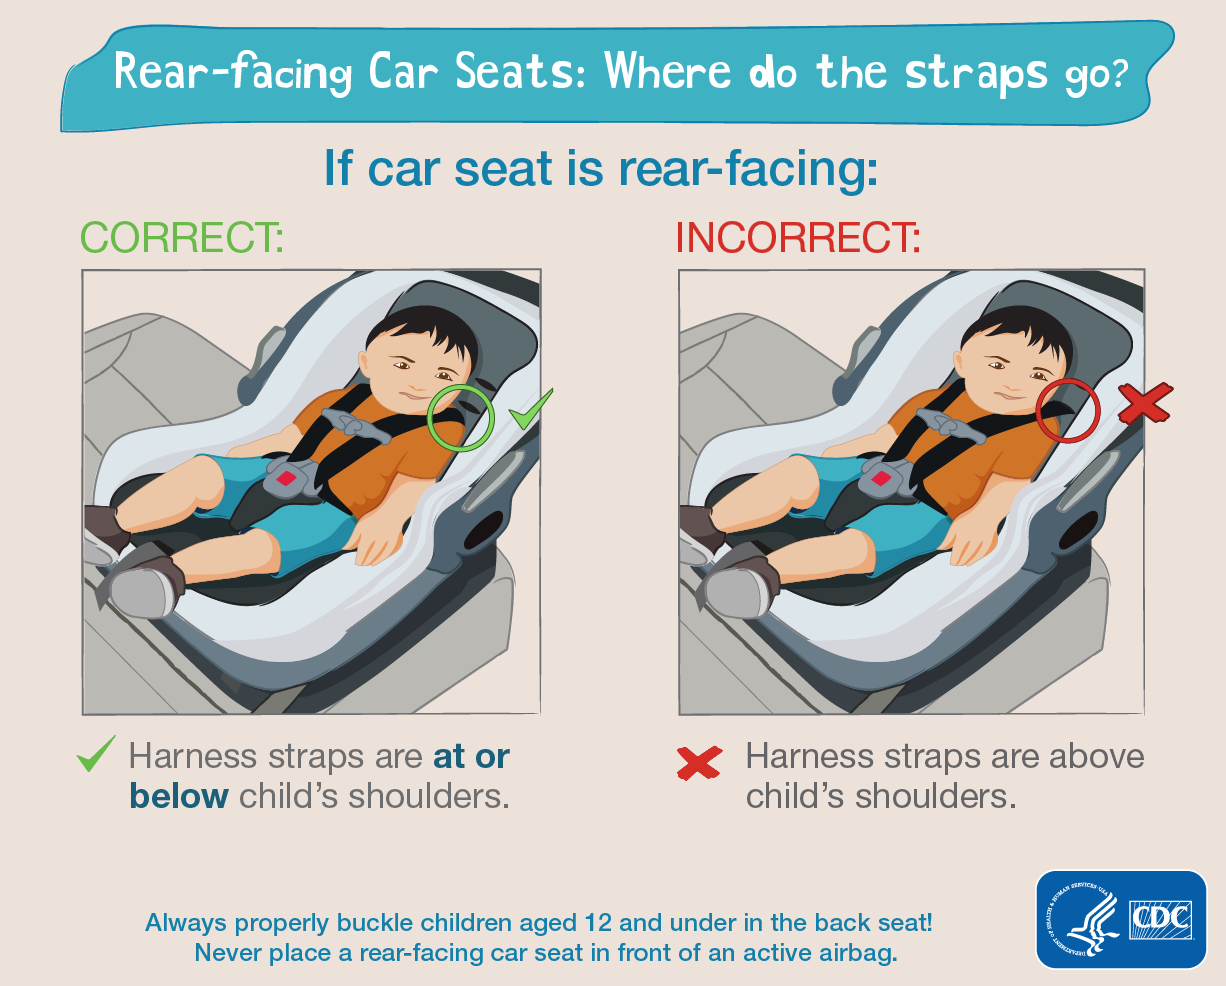 age limit for forward facing car seat